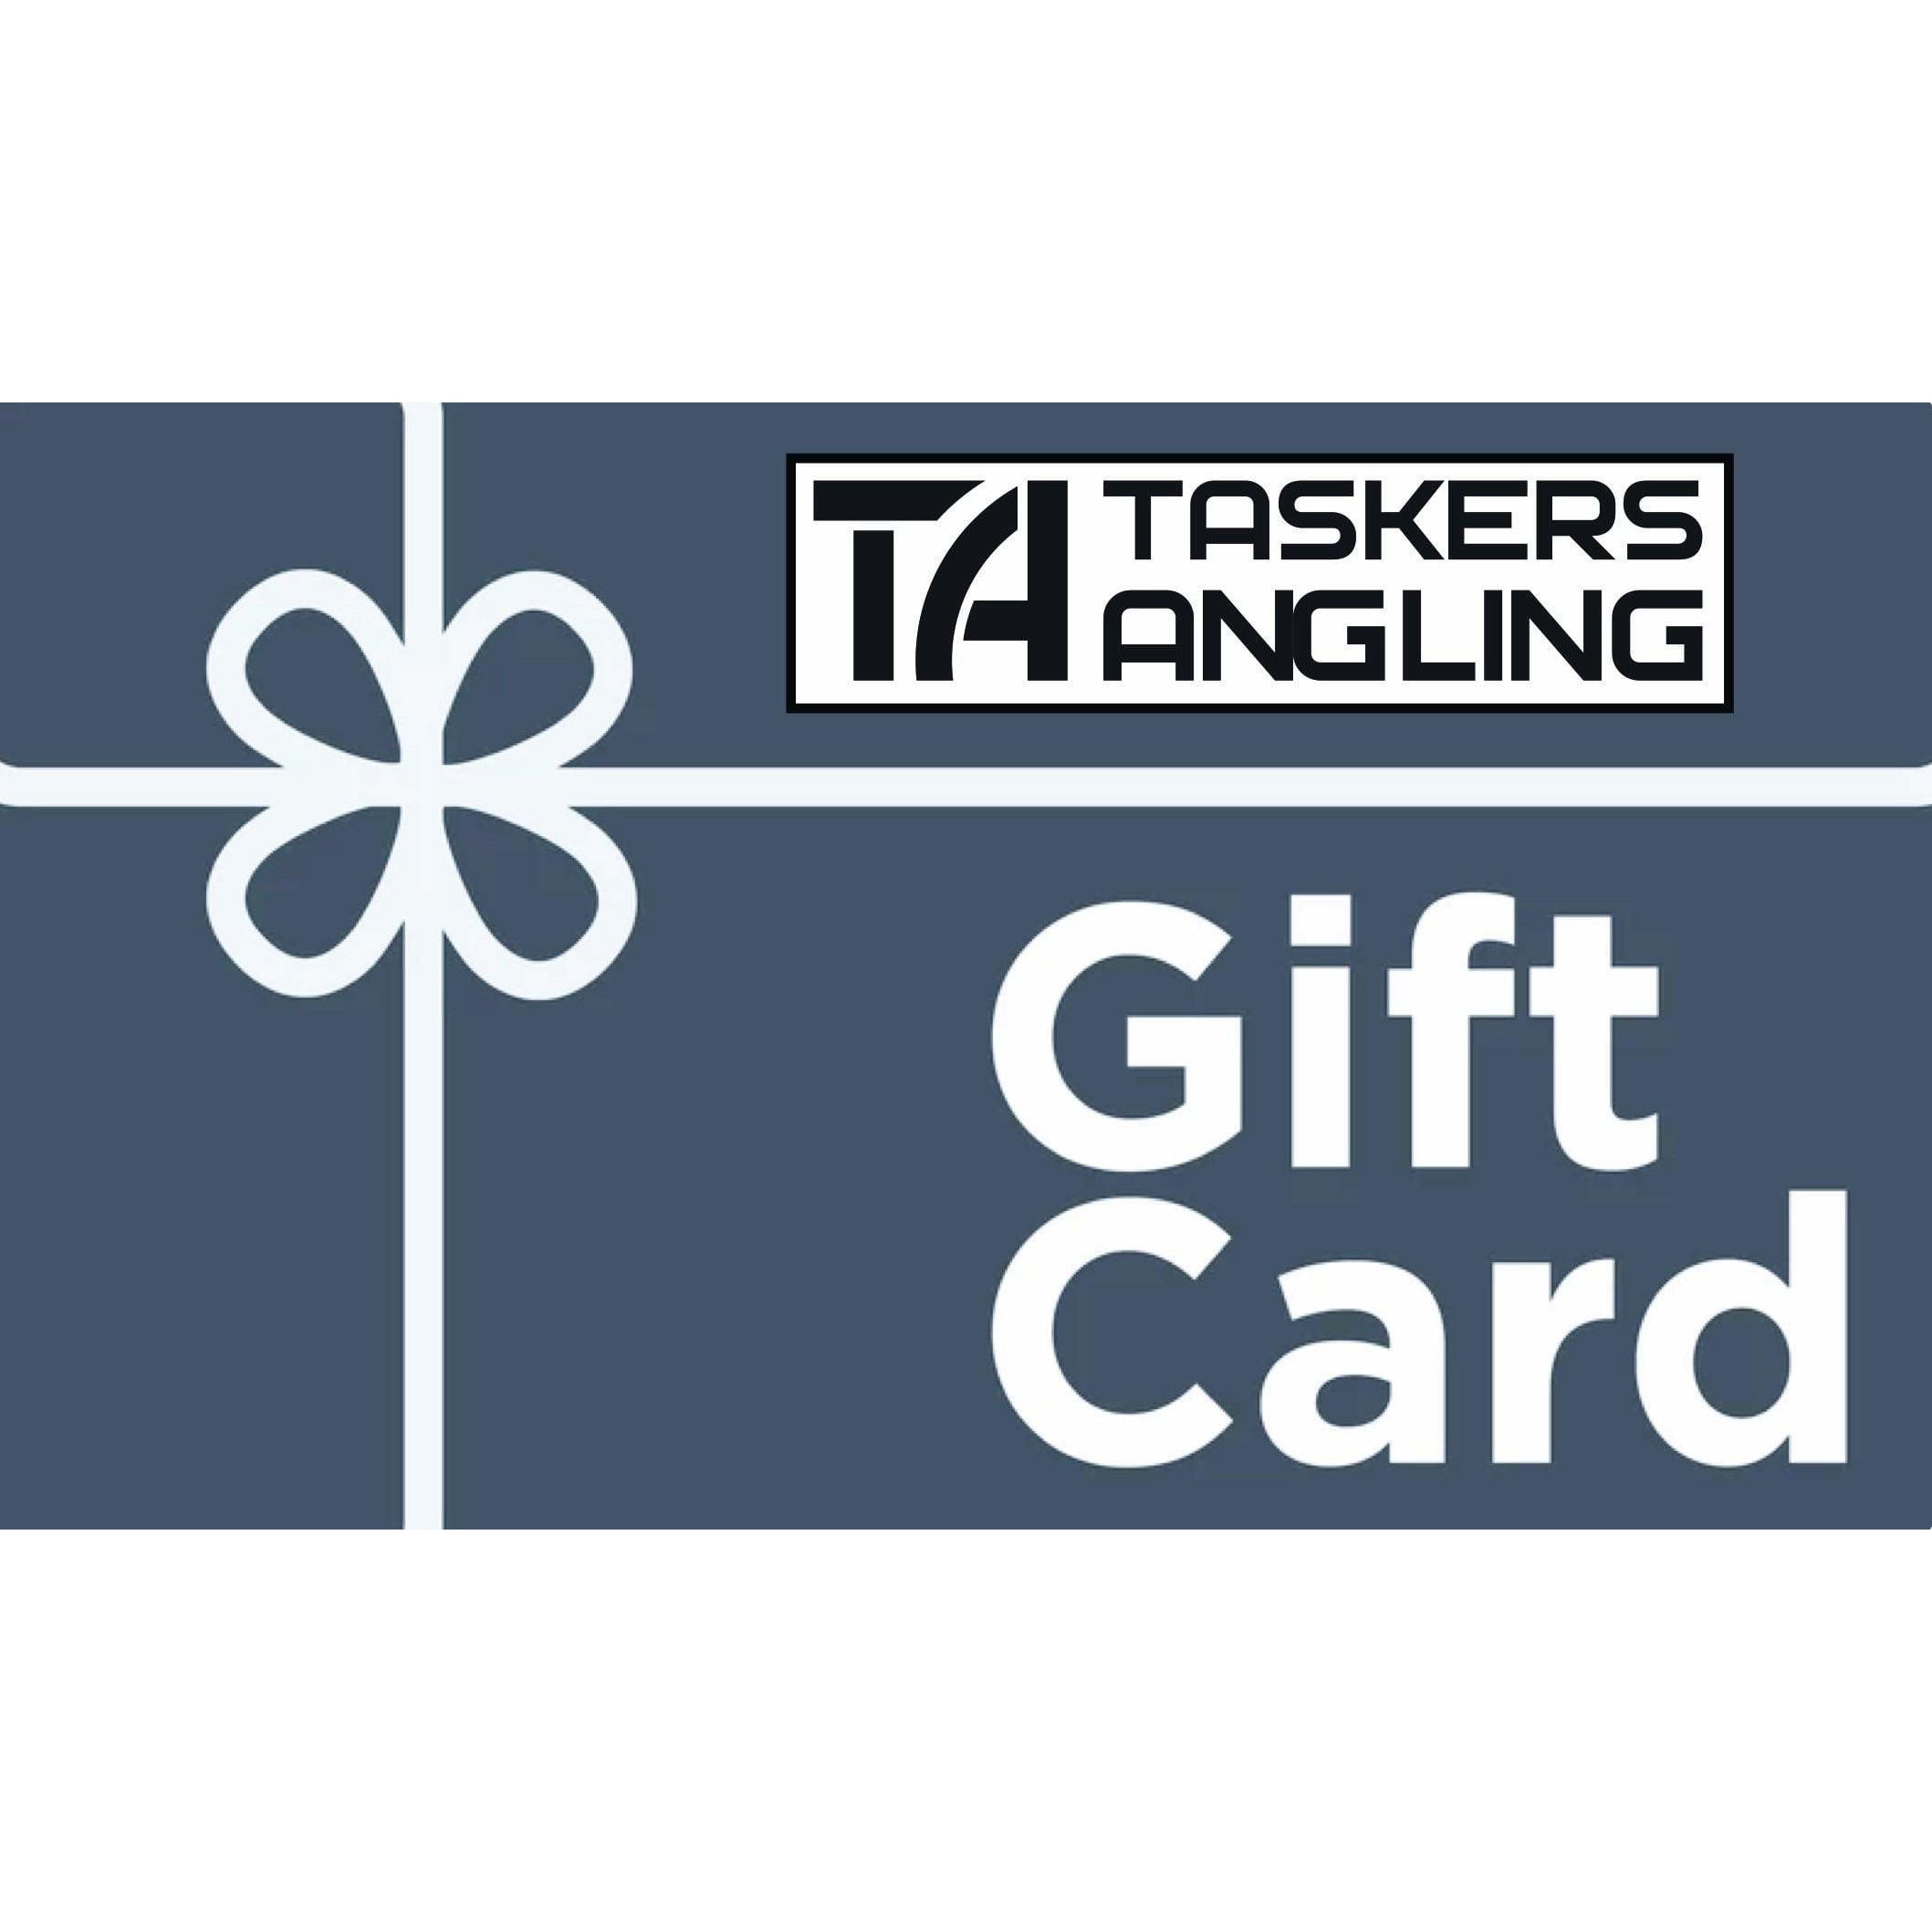 Fishing Gift Cards